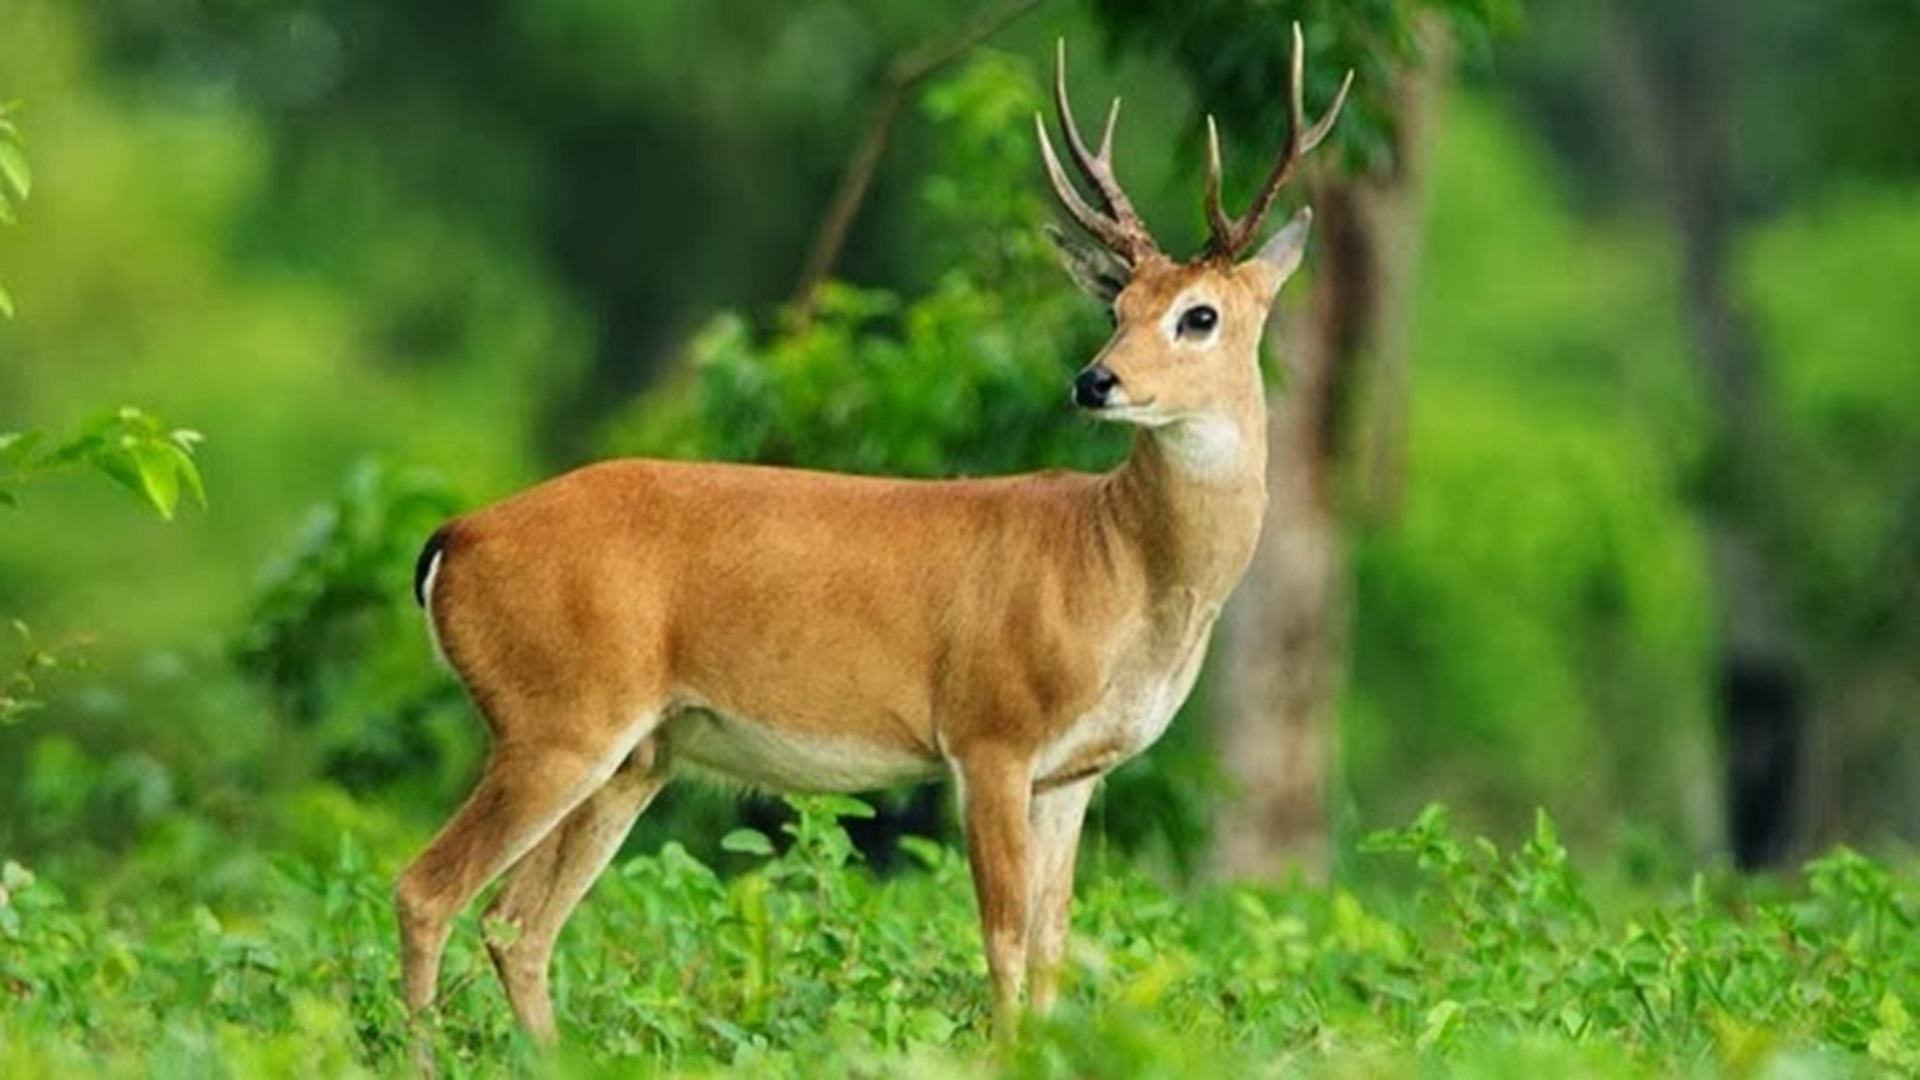 33-338403_deer-photos-free-download-national-animal-of-antigua | HAKONE  JAPAN | Visit to Experience the Beauty of Japan